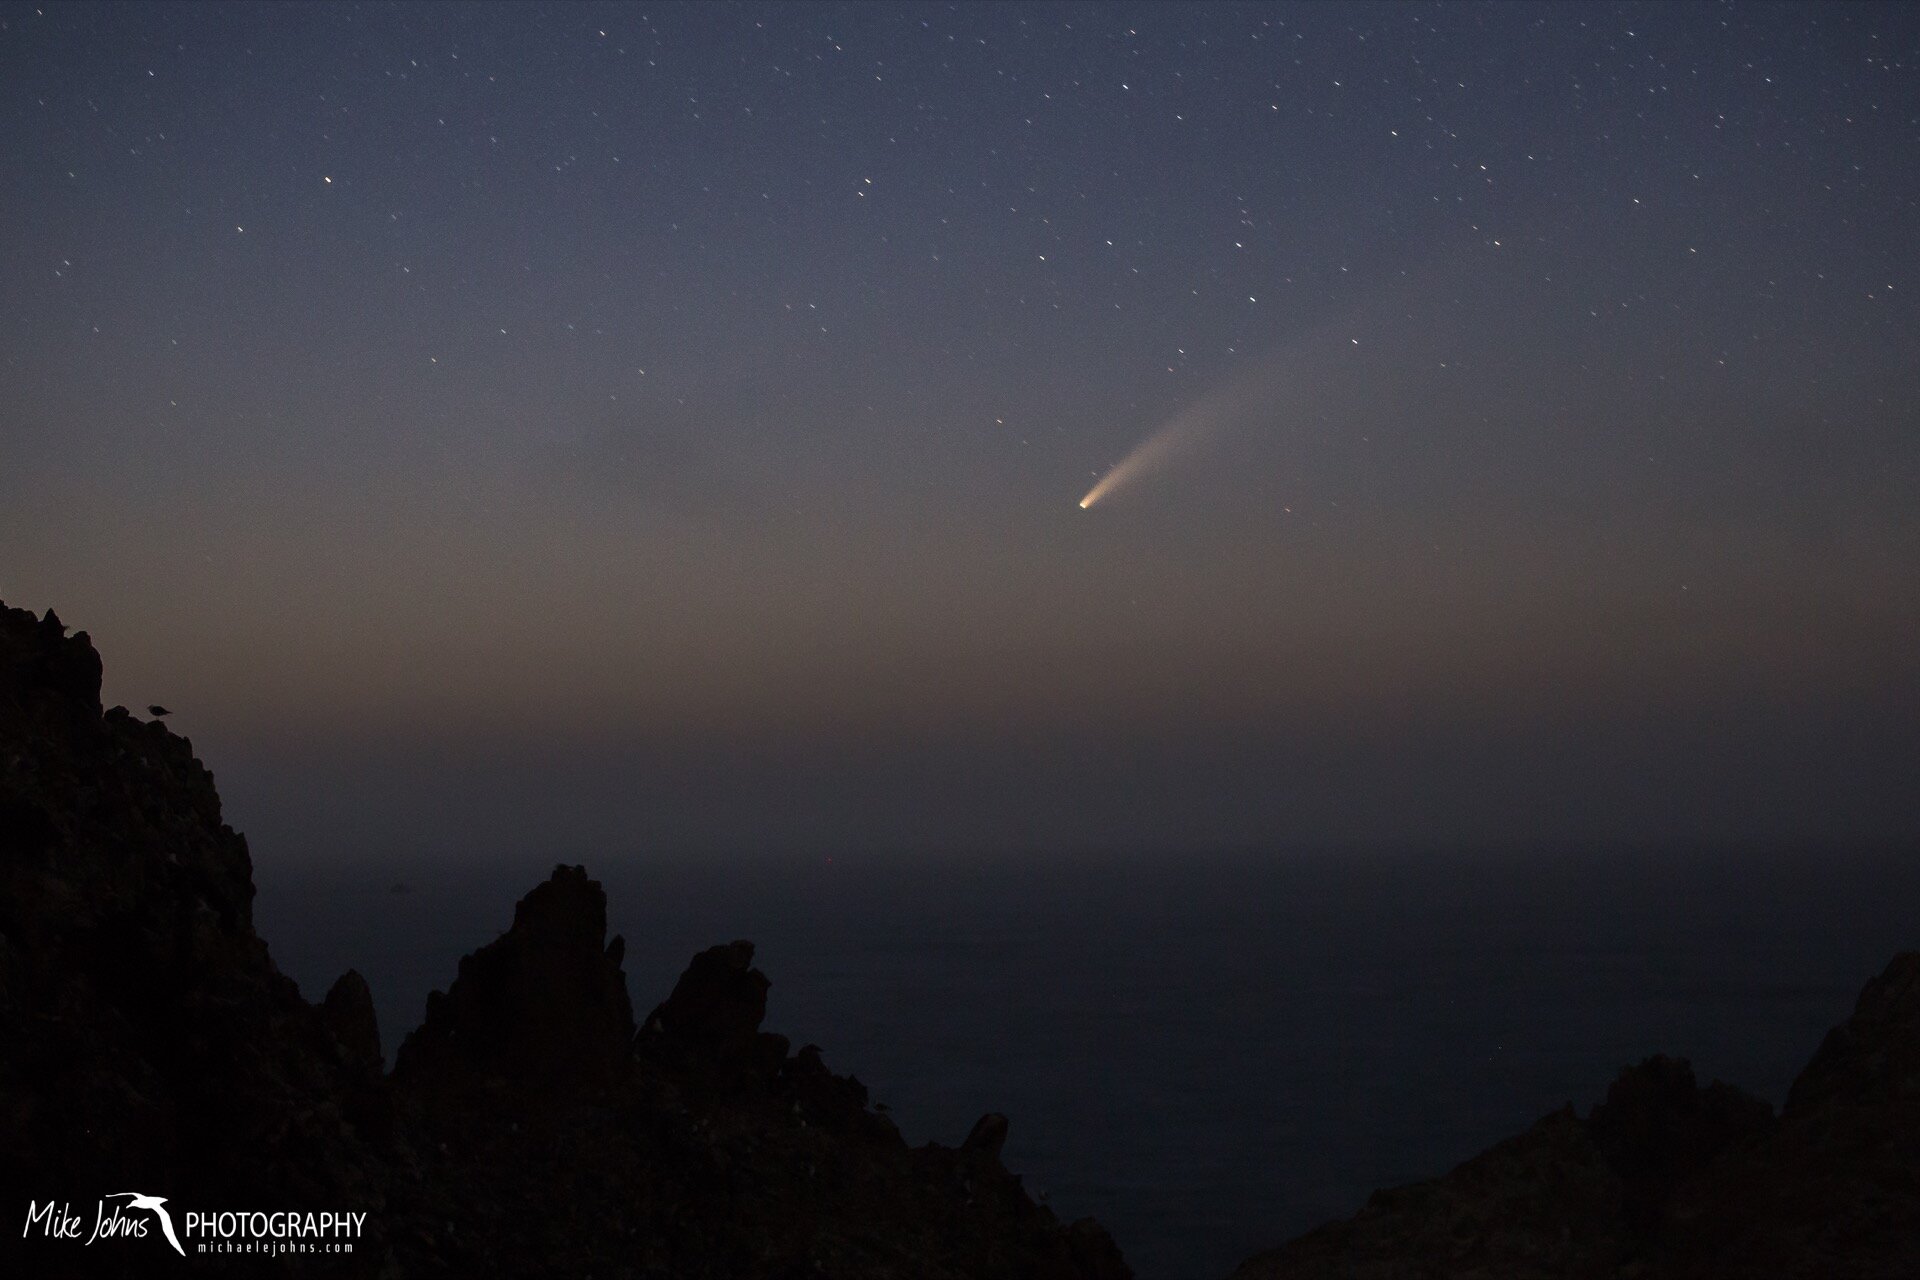  Evening look at the comet NEOWISE setting to the north.  